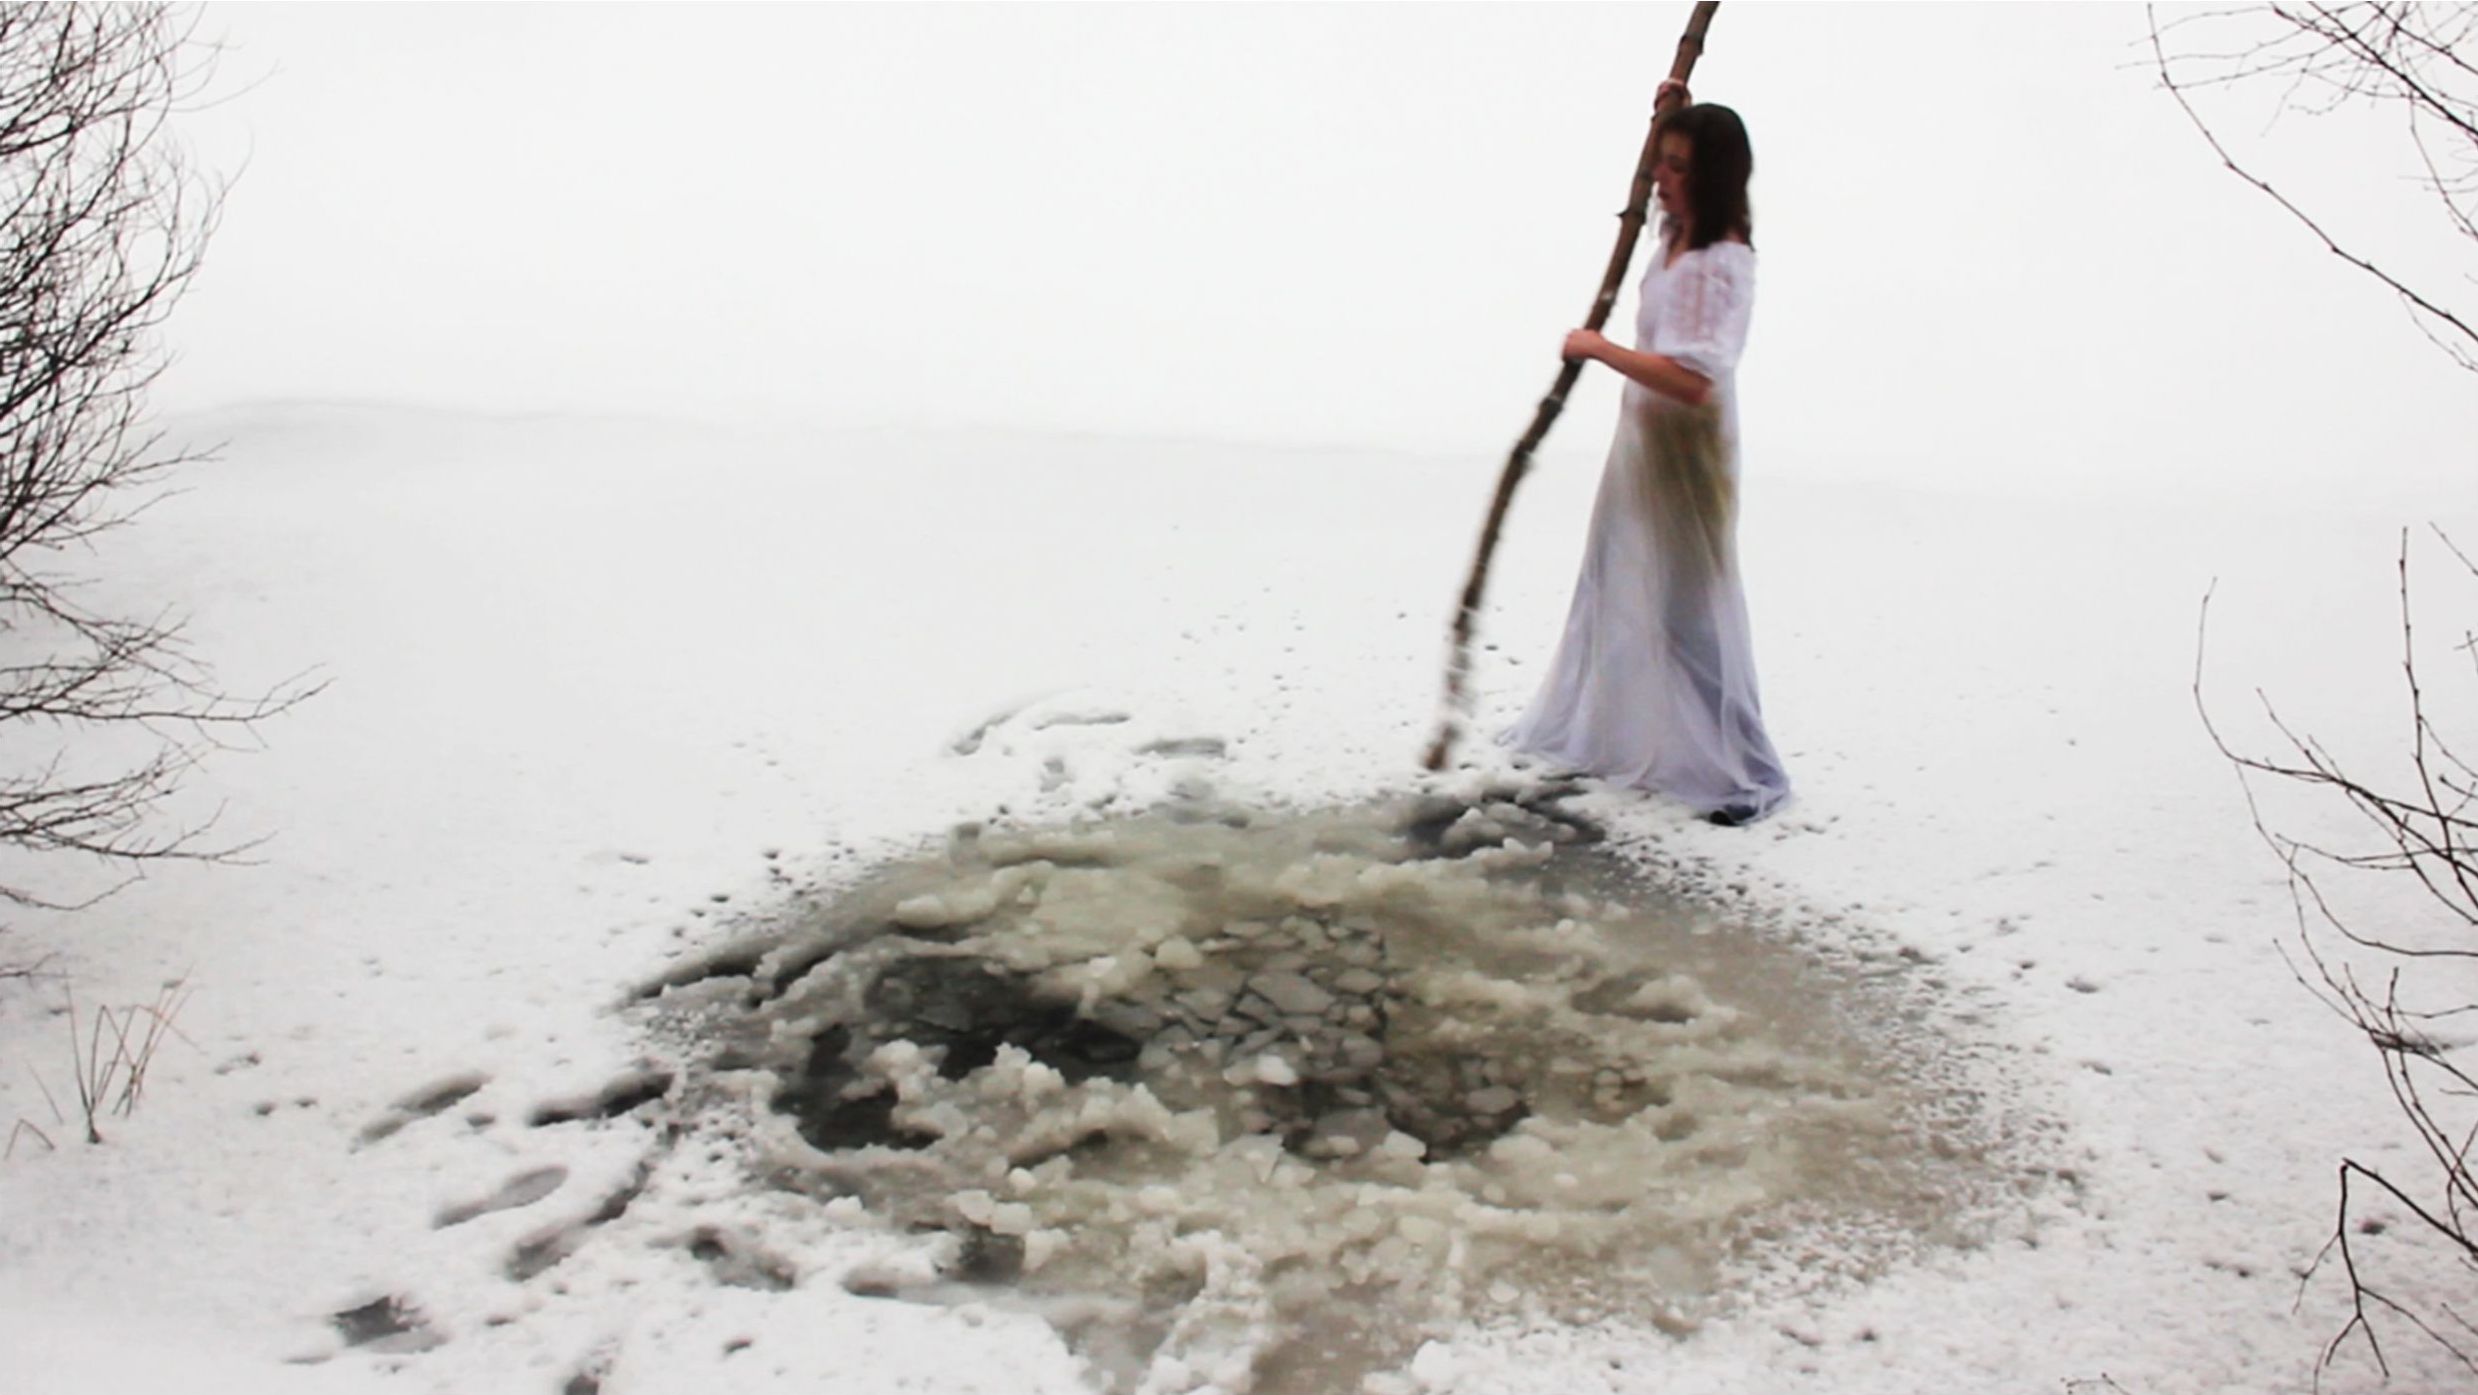 Ice, 2012. The Russian expression “to be flopping like a fish on the ice” means to struggle desperately. Here, a young woman in a white dress, a symbol of unwanted femininity, is trying to break the ice just as desperately